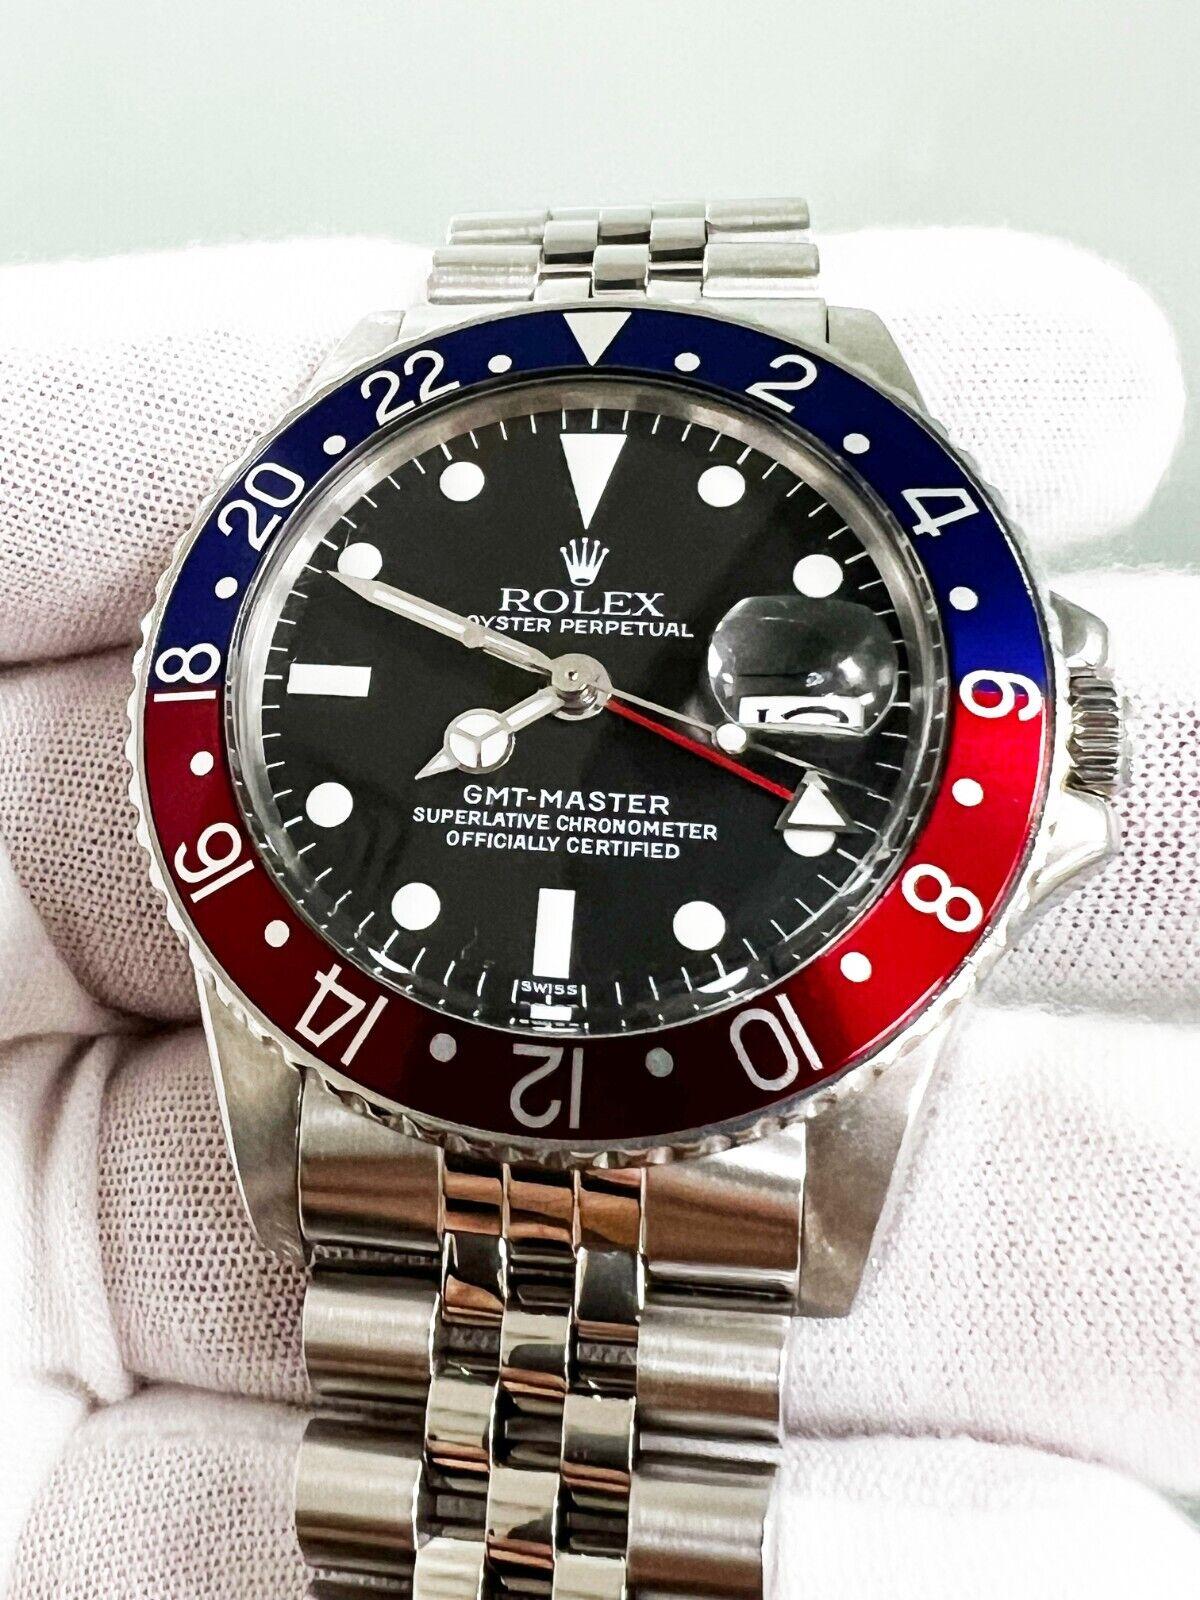 Vintage Rolex 1675 GMT Master Pepsi Red and Blue Stainless Jubilee Band MINT 11